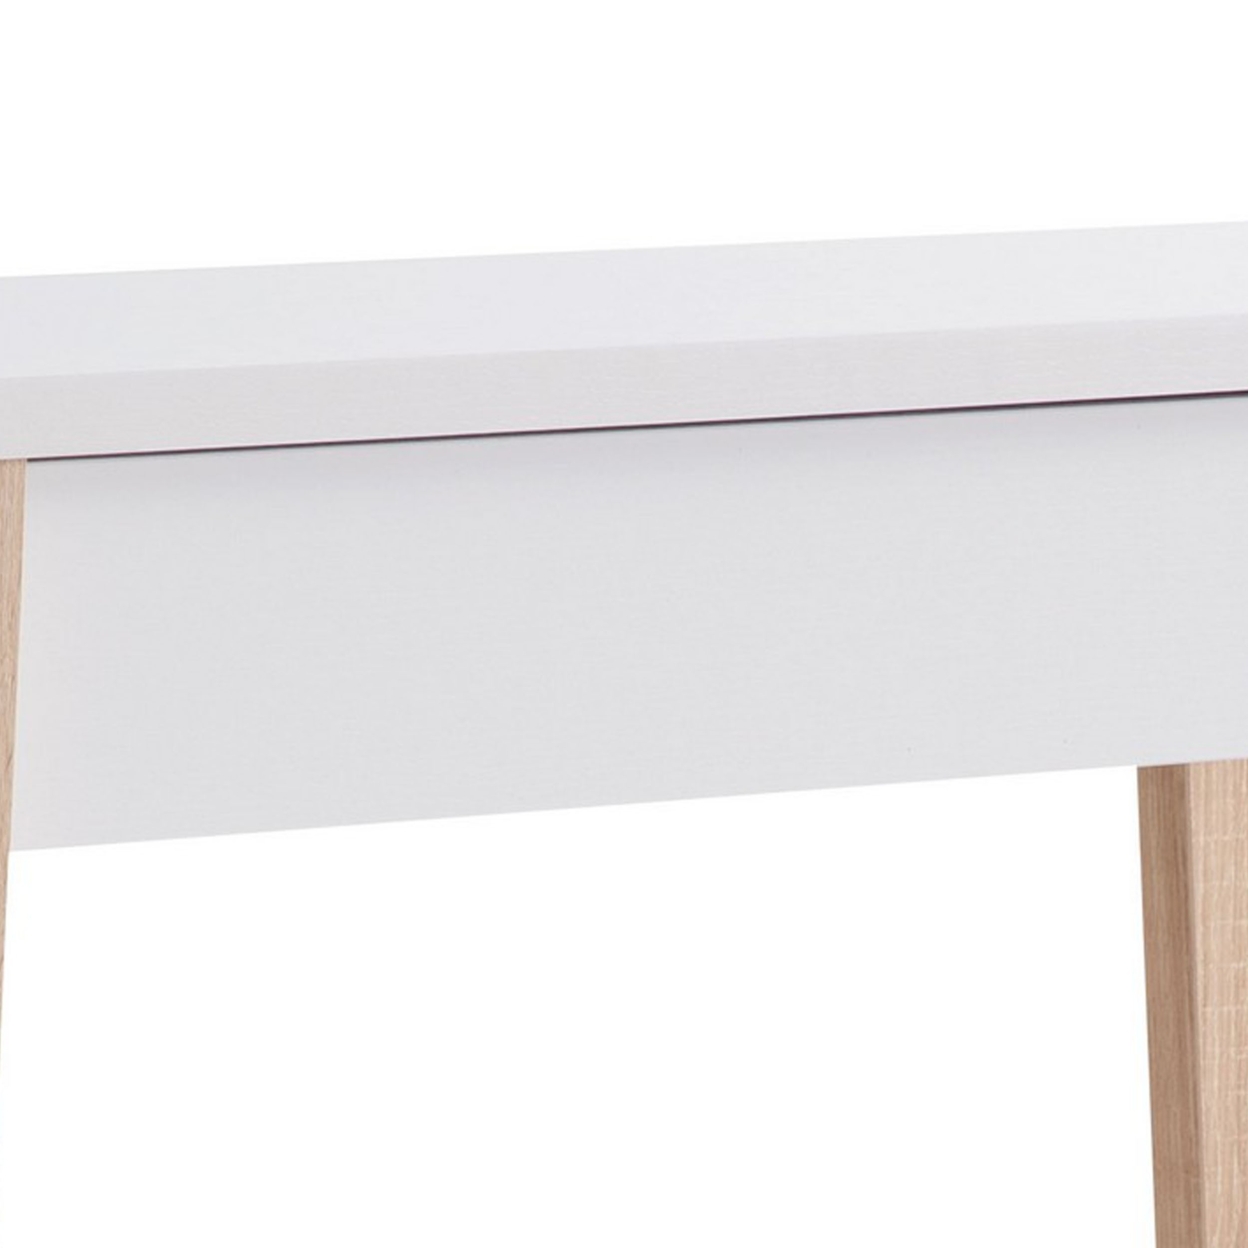 34 Inch Console Table With Drawer And Shelf, Tapered Legs, White, Brown- Saltoro Sherpi